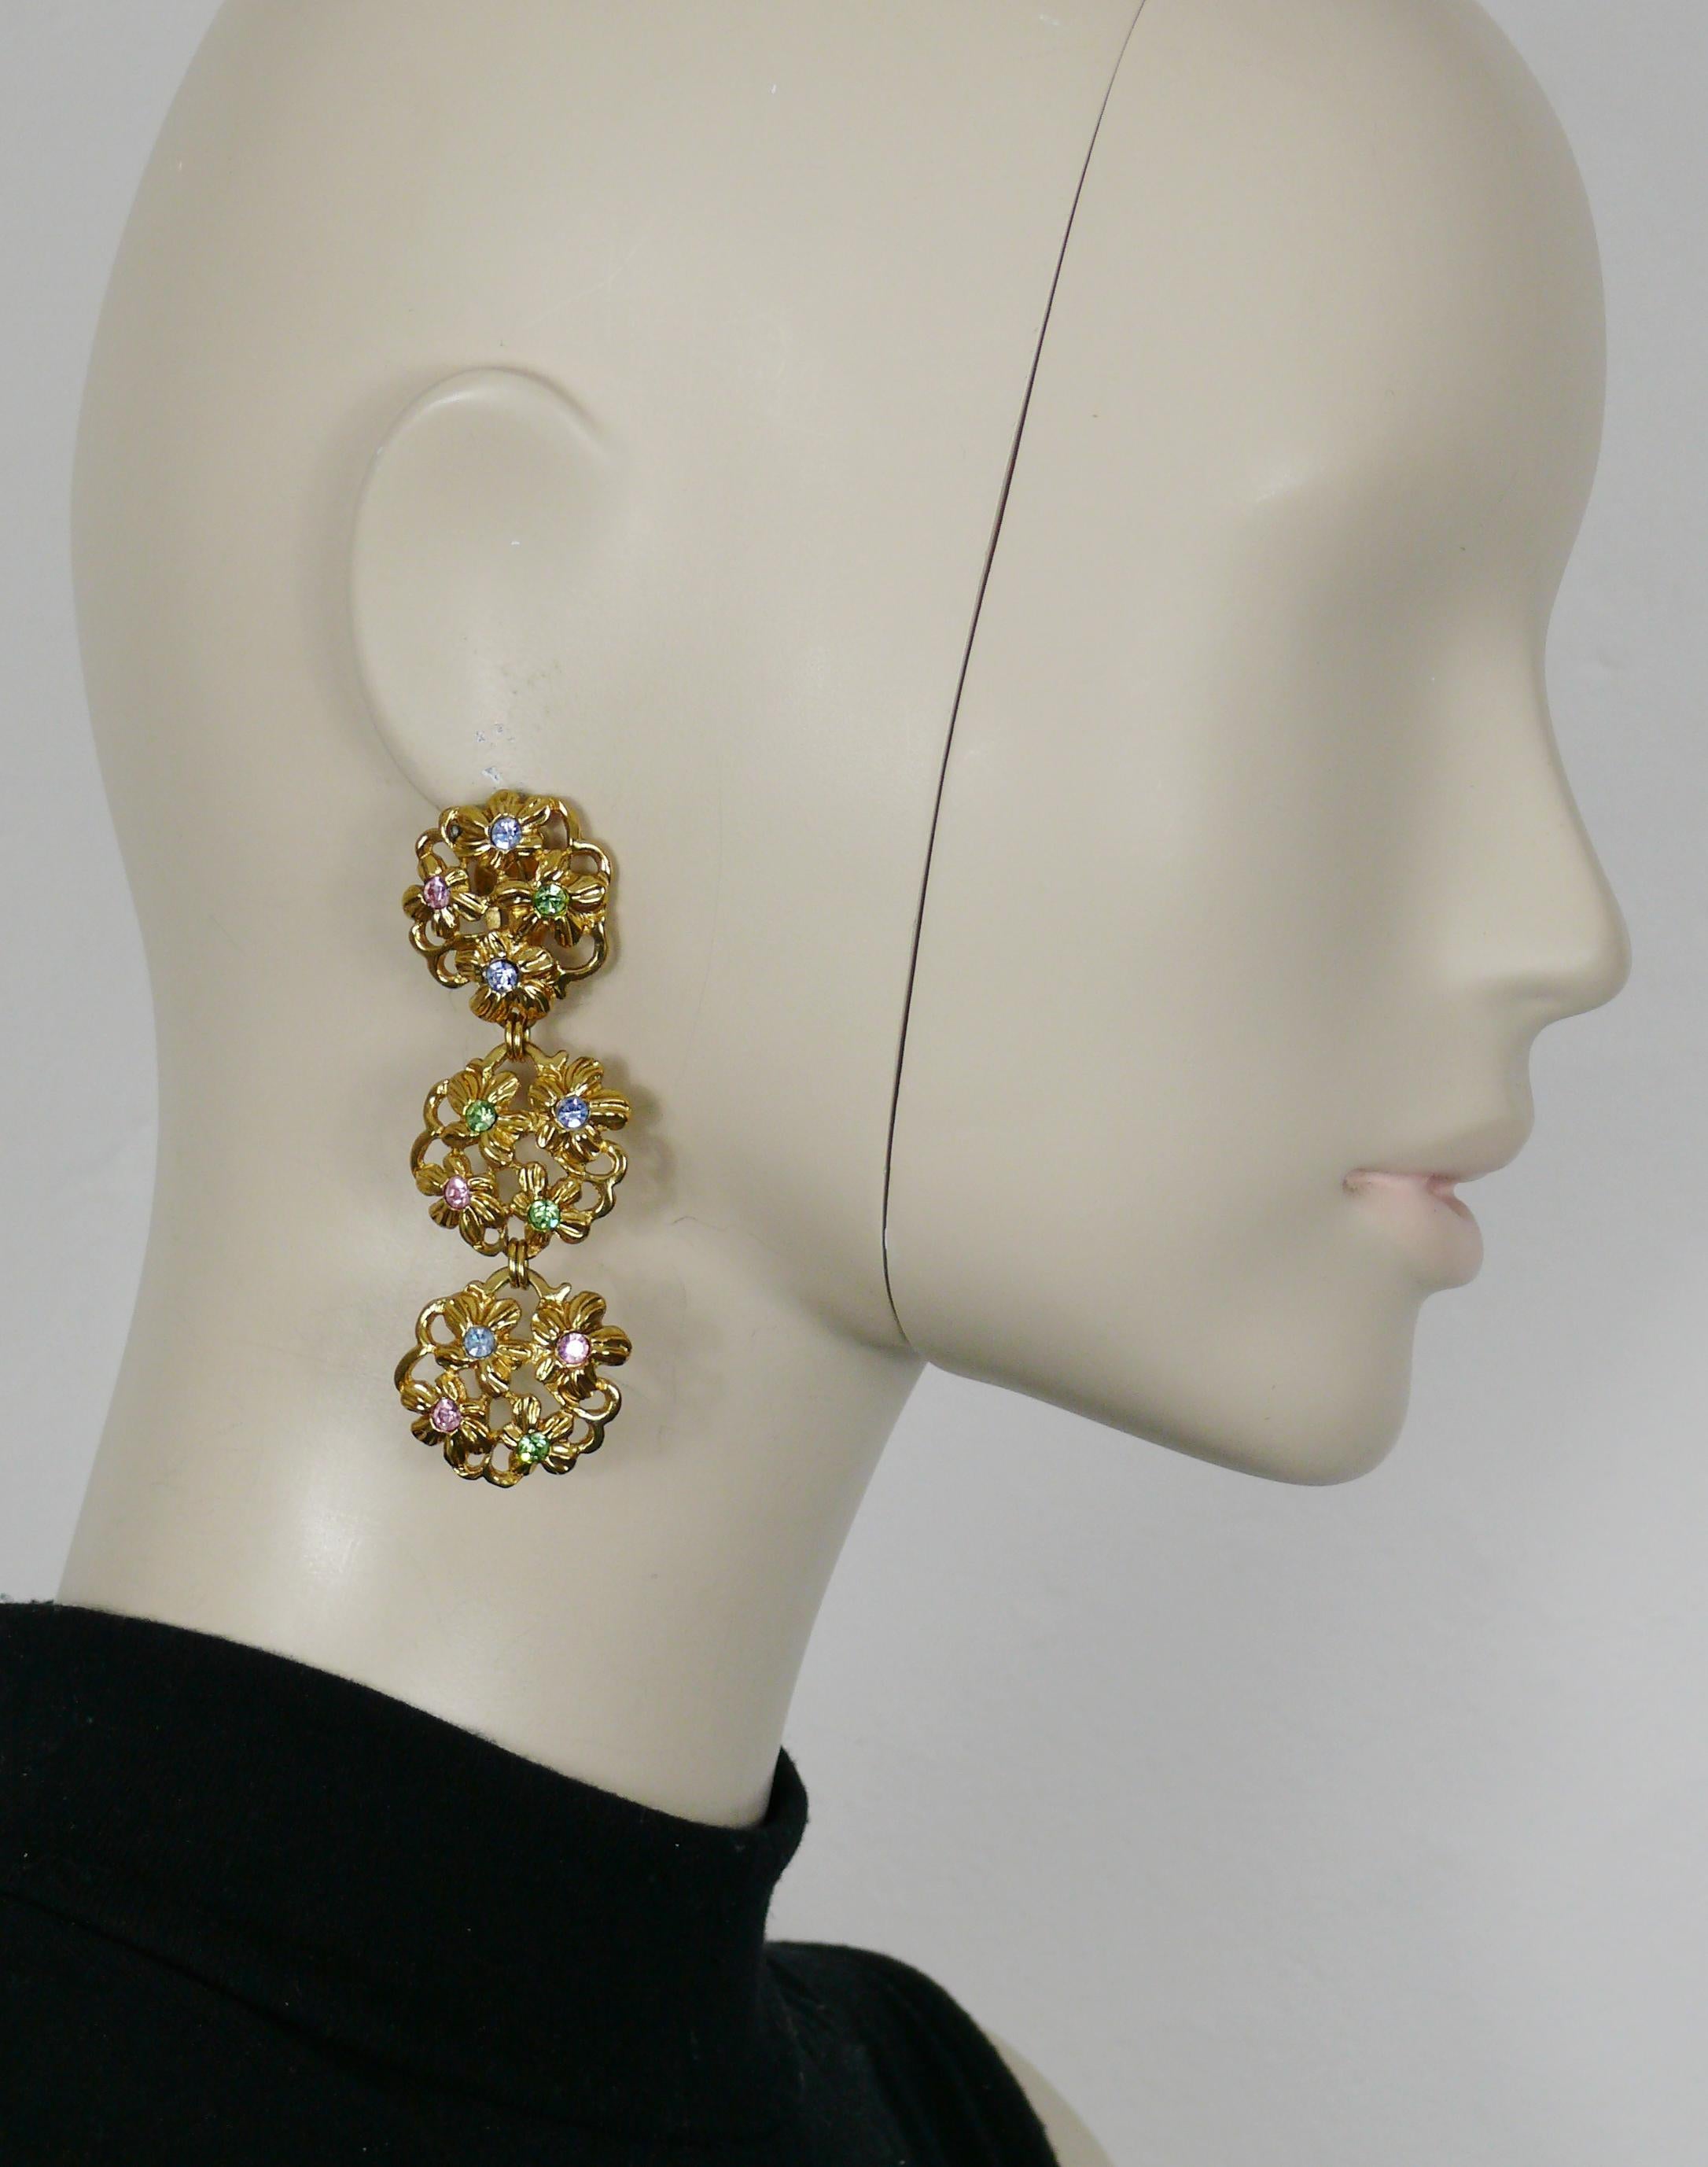 YVES SAINT LAURENT vintage gold tone floral dangling earrings (clip-on) embellished with multicolored crystals.

Embossed YSL.
Made in France.

Indicative measurements : height approx. 8 cm (3.15 inches) / width approx. 2.5 cm (0.98 inch).

Weight